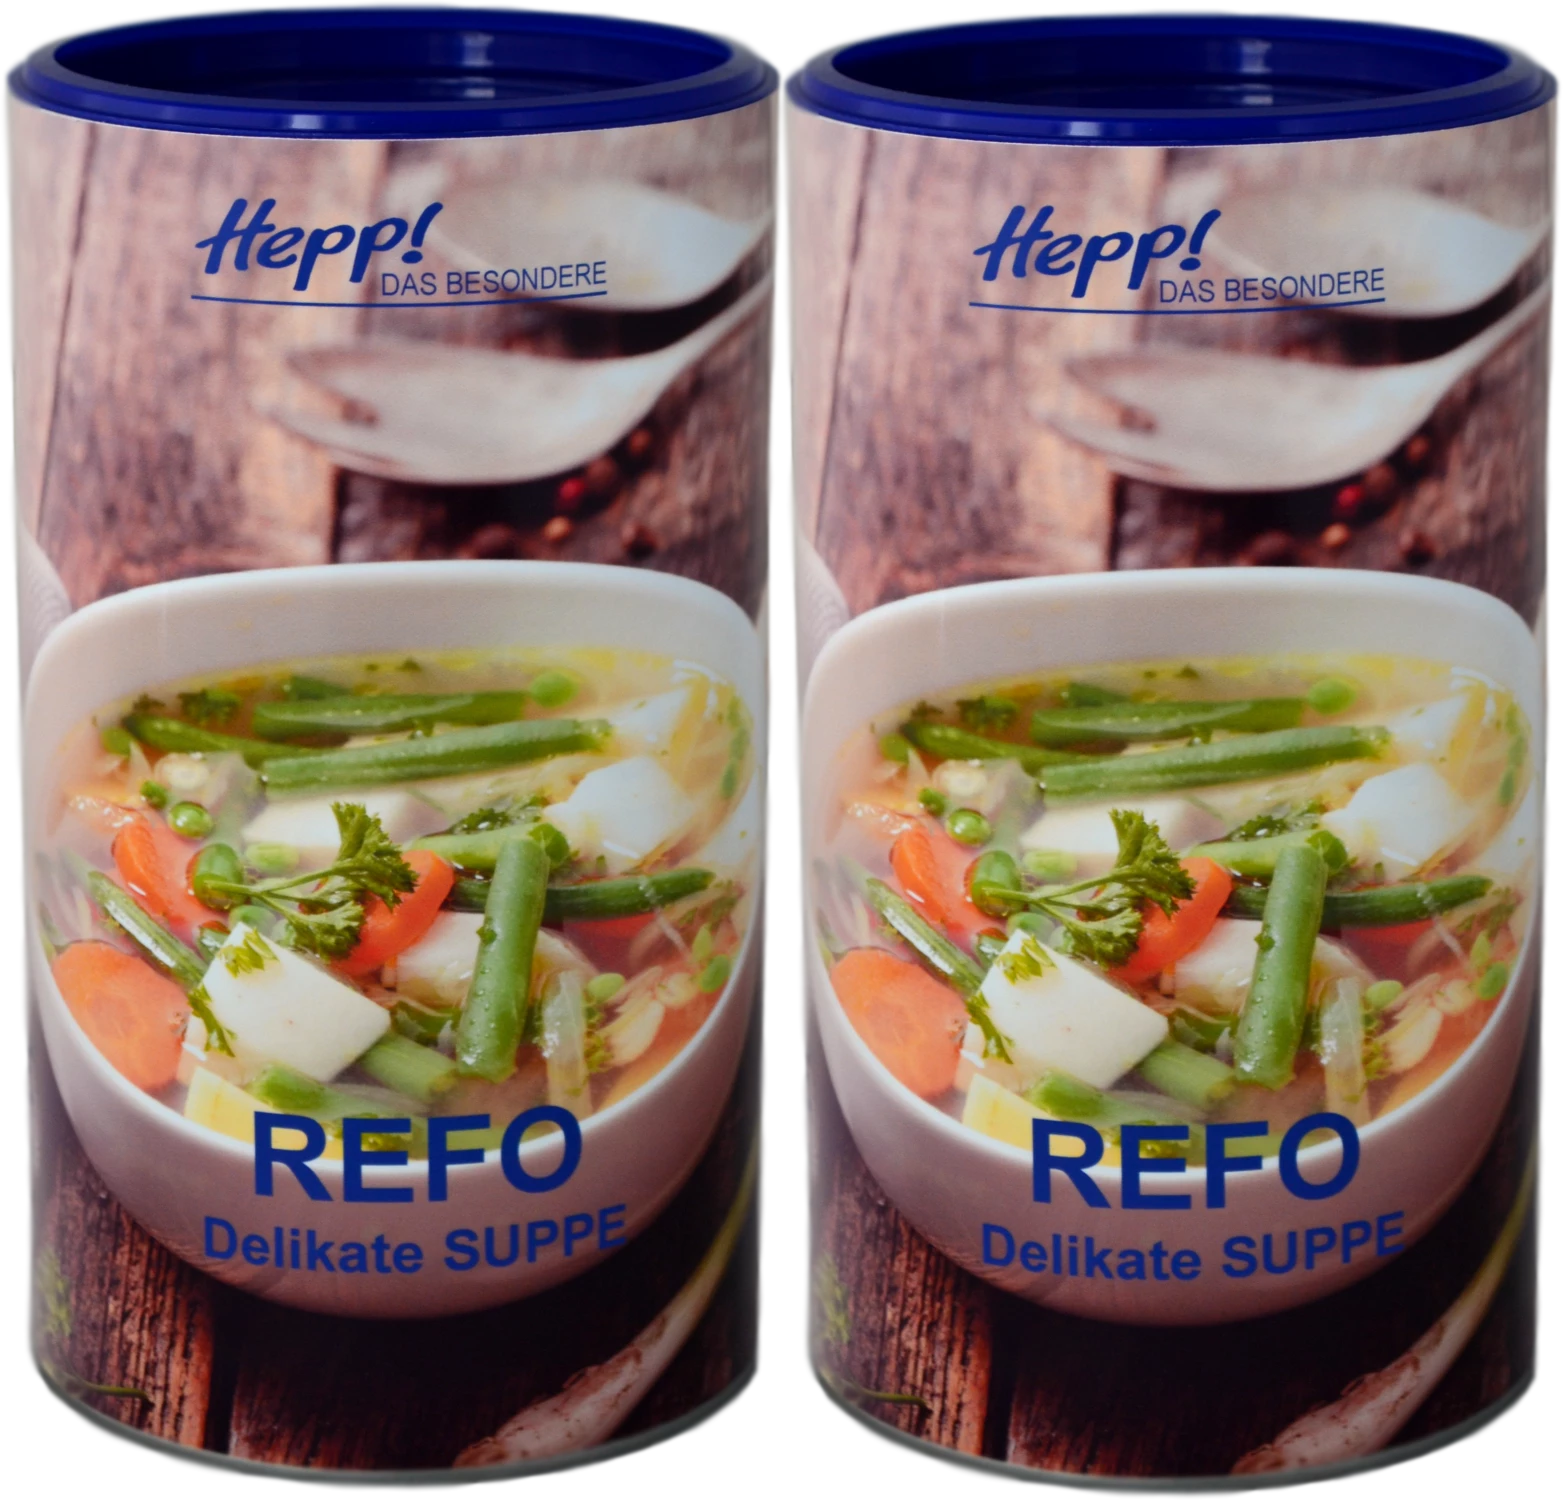 Refo Delikate Suppe (2x200g)